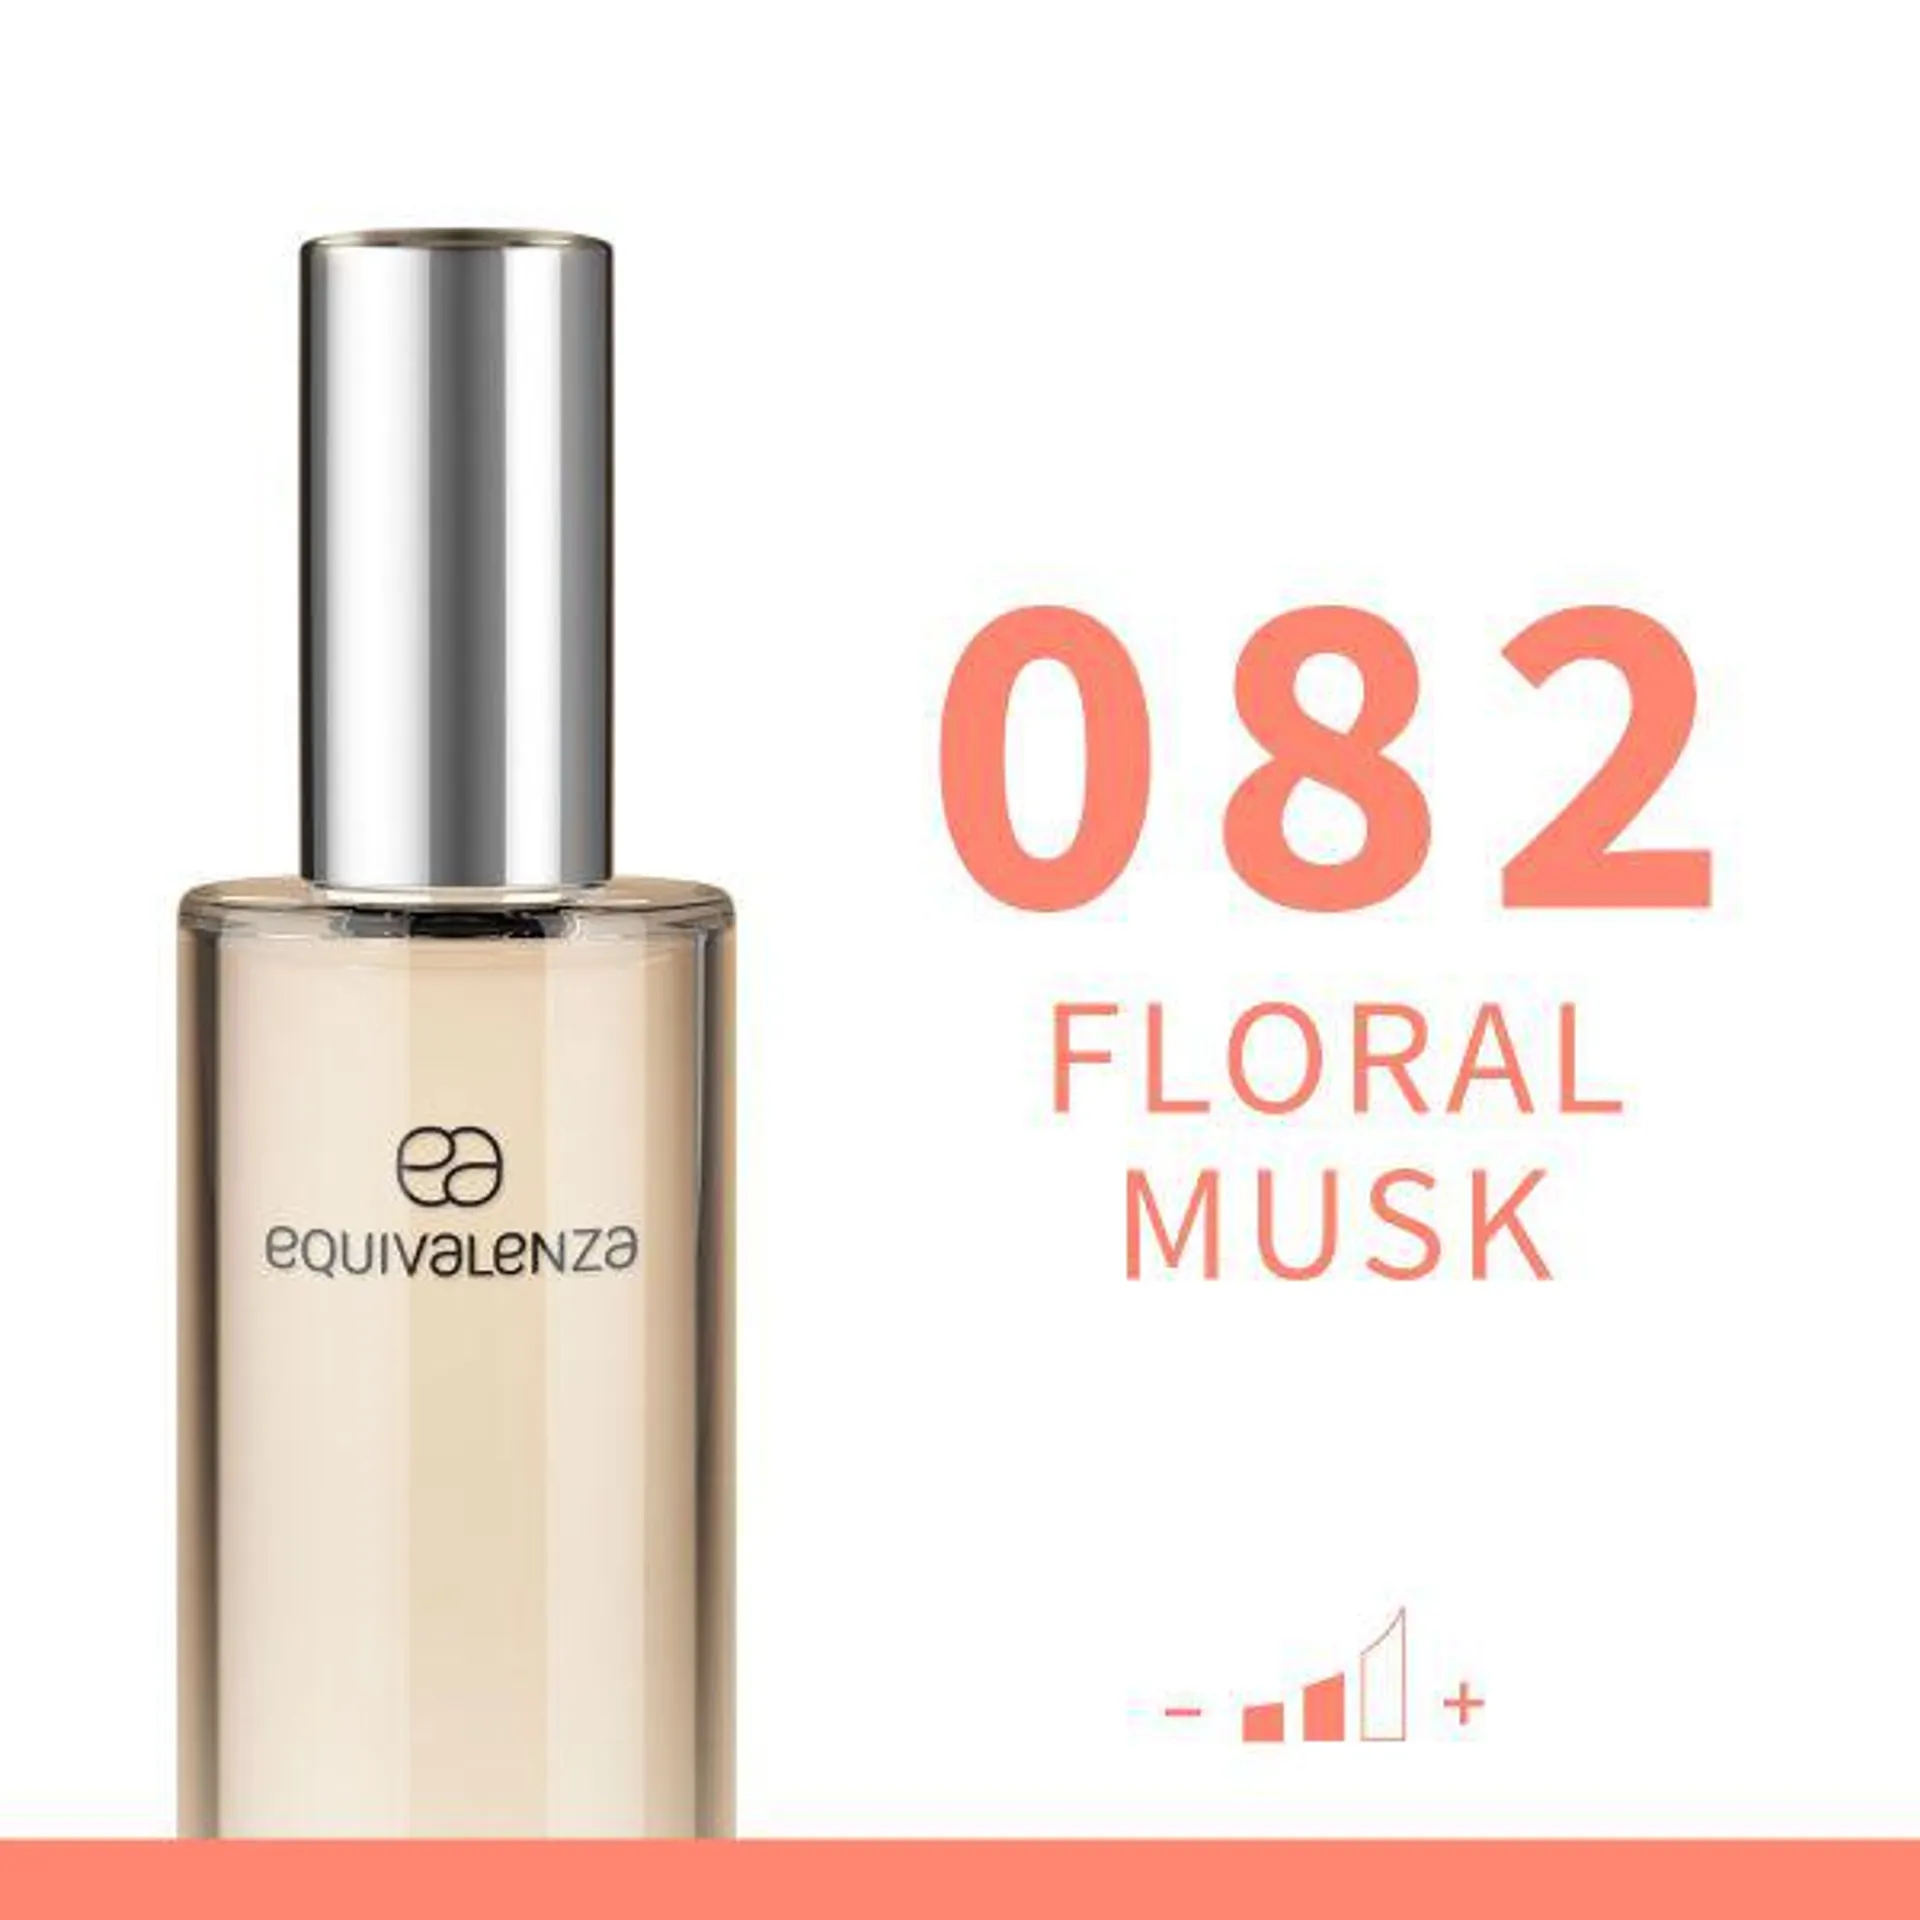 Floral Musk 082